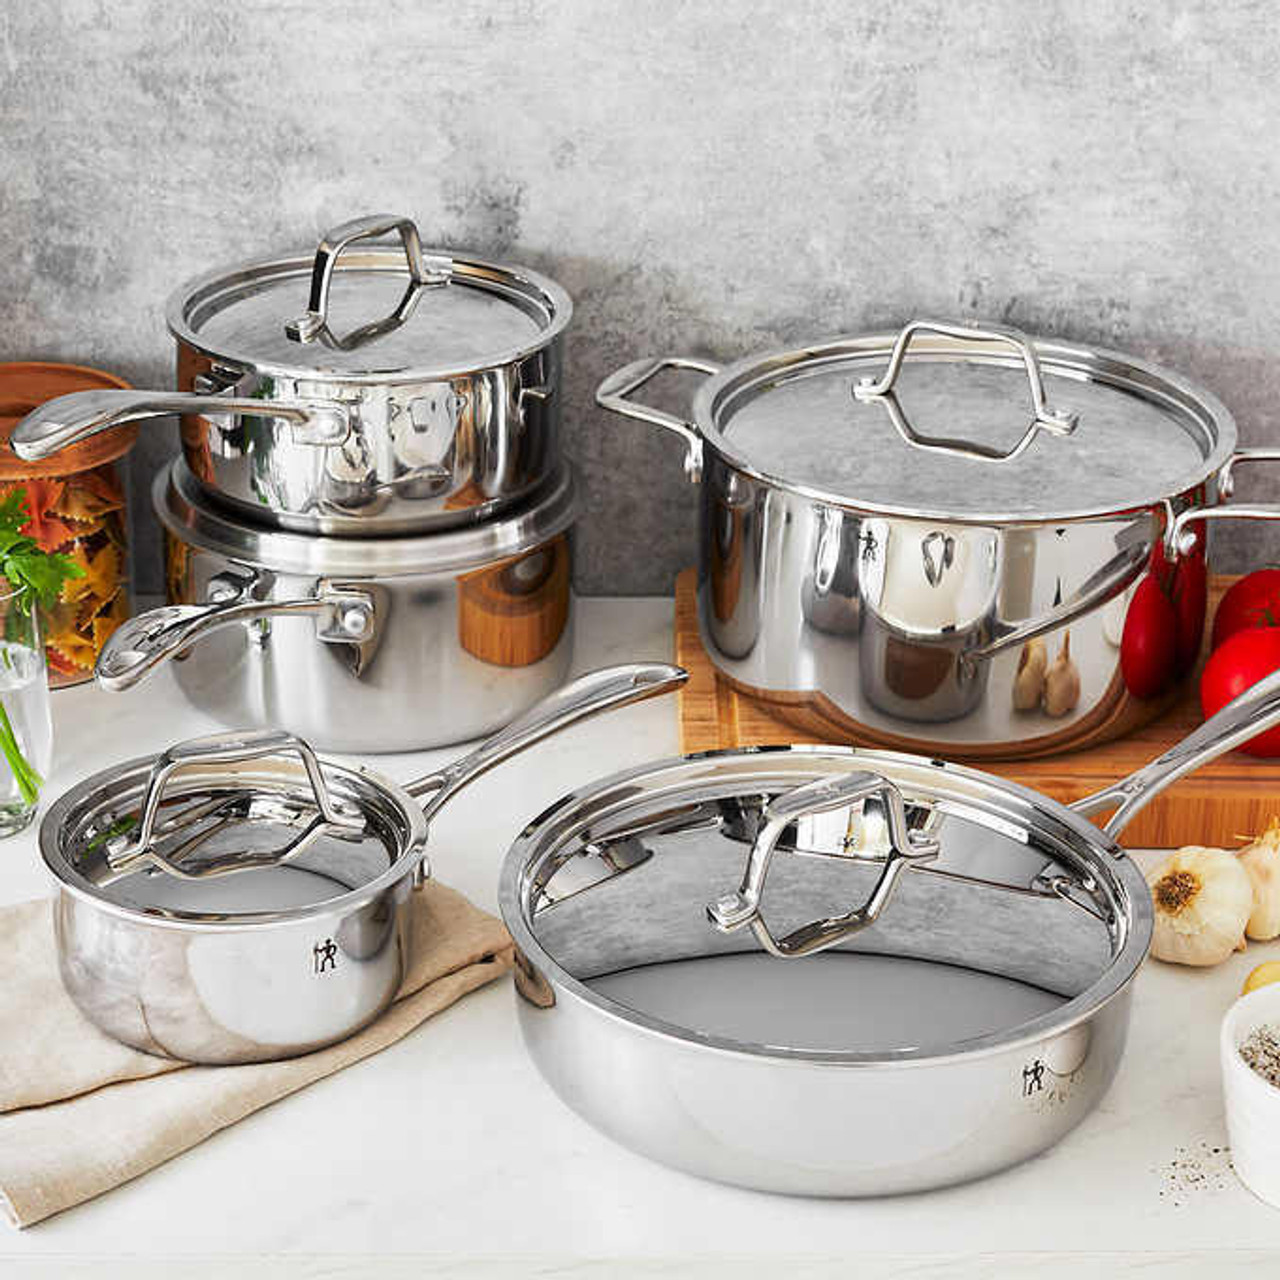 Cuisinart Custom-Clad 5-Ply Stainless Steel Saucepan with Lid | 3 qt.